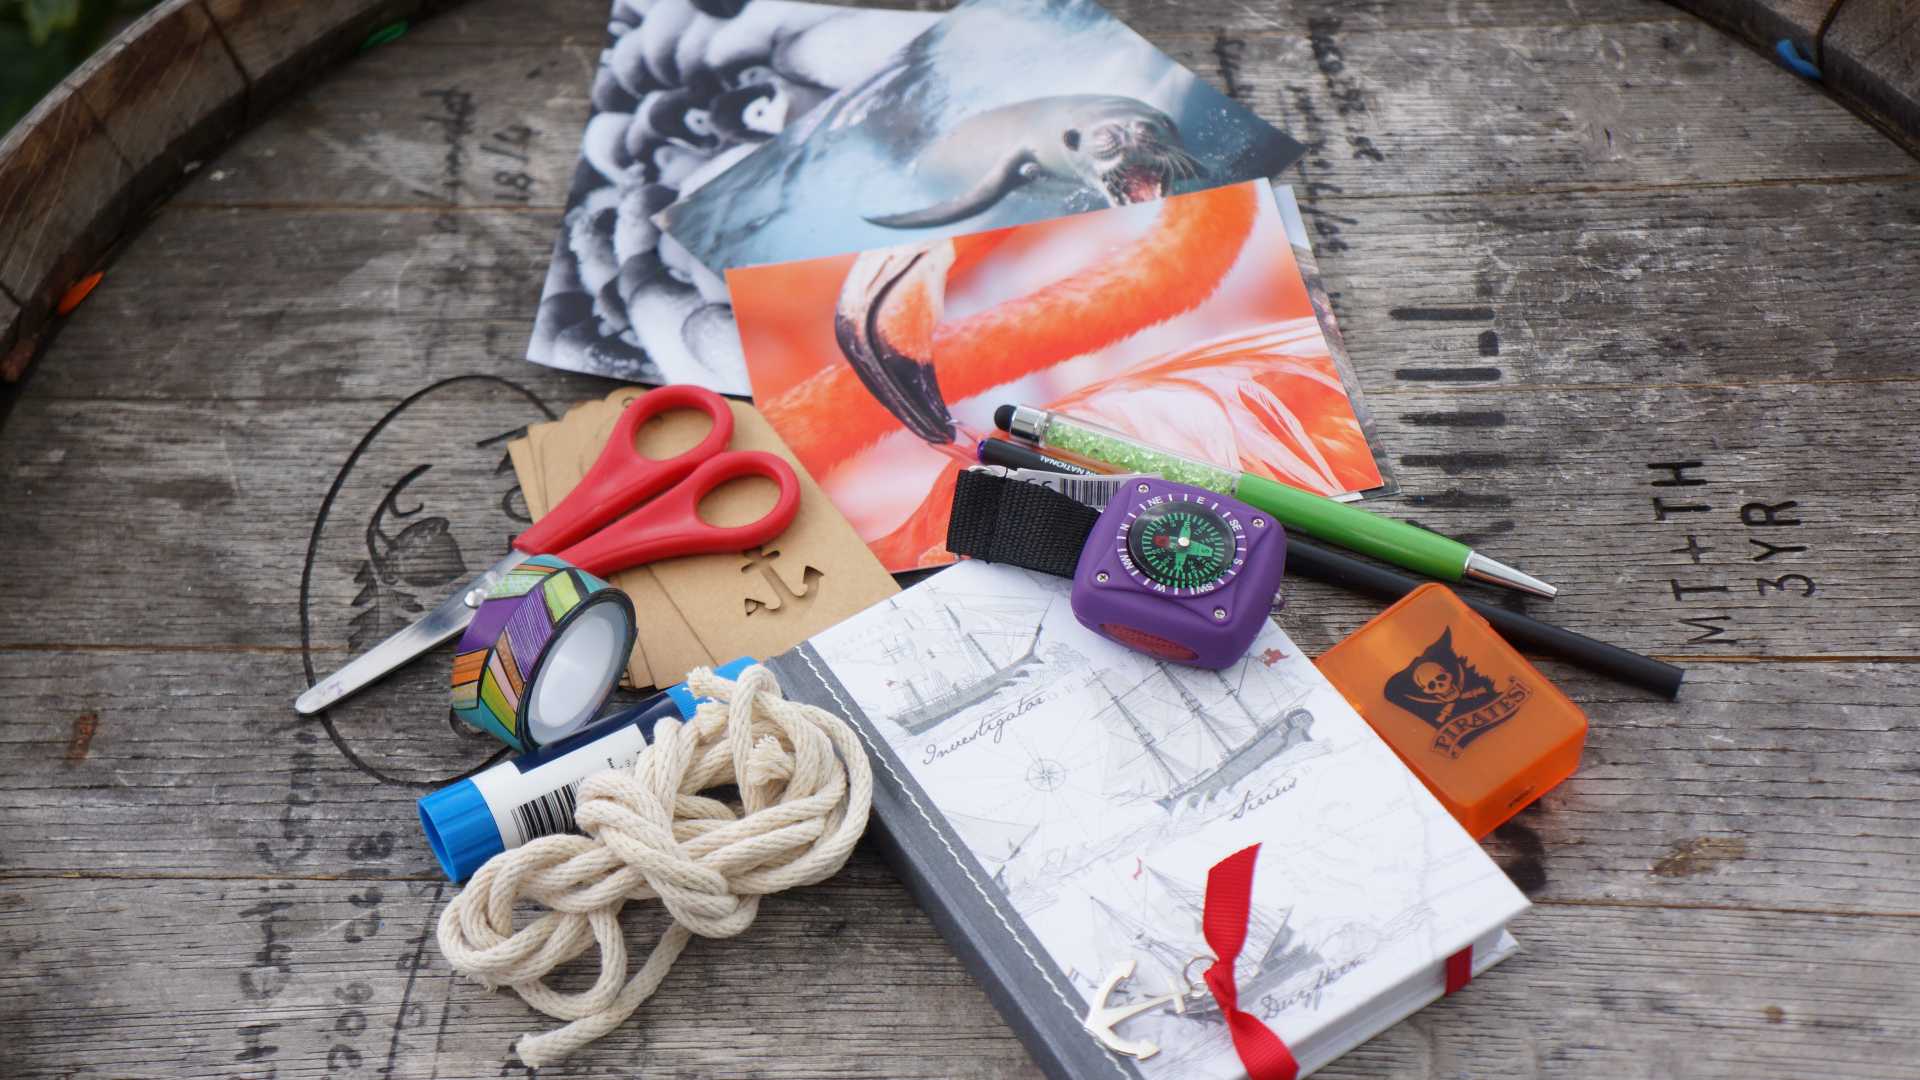 Backyard activities included in the Australian National Maritime Museum's Craft Make Create Kit